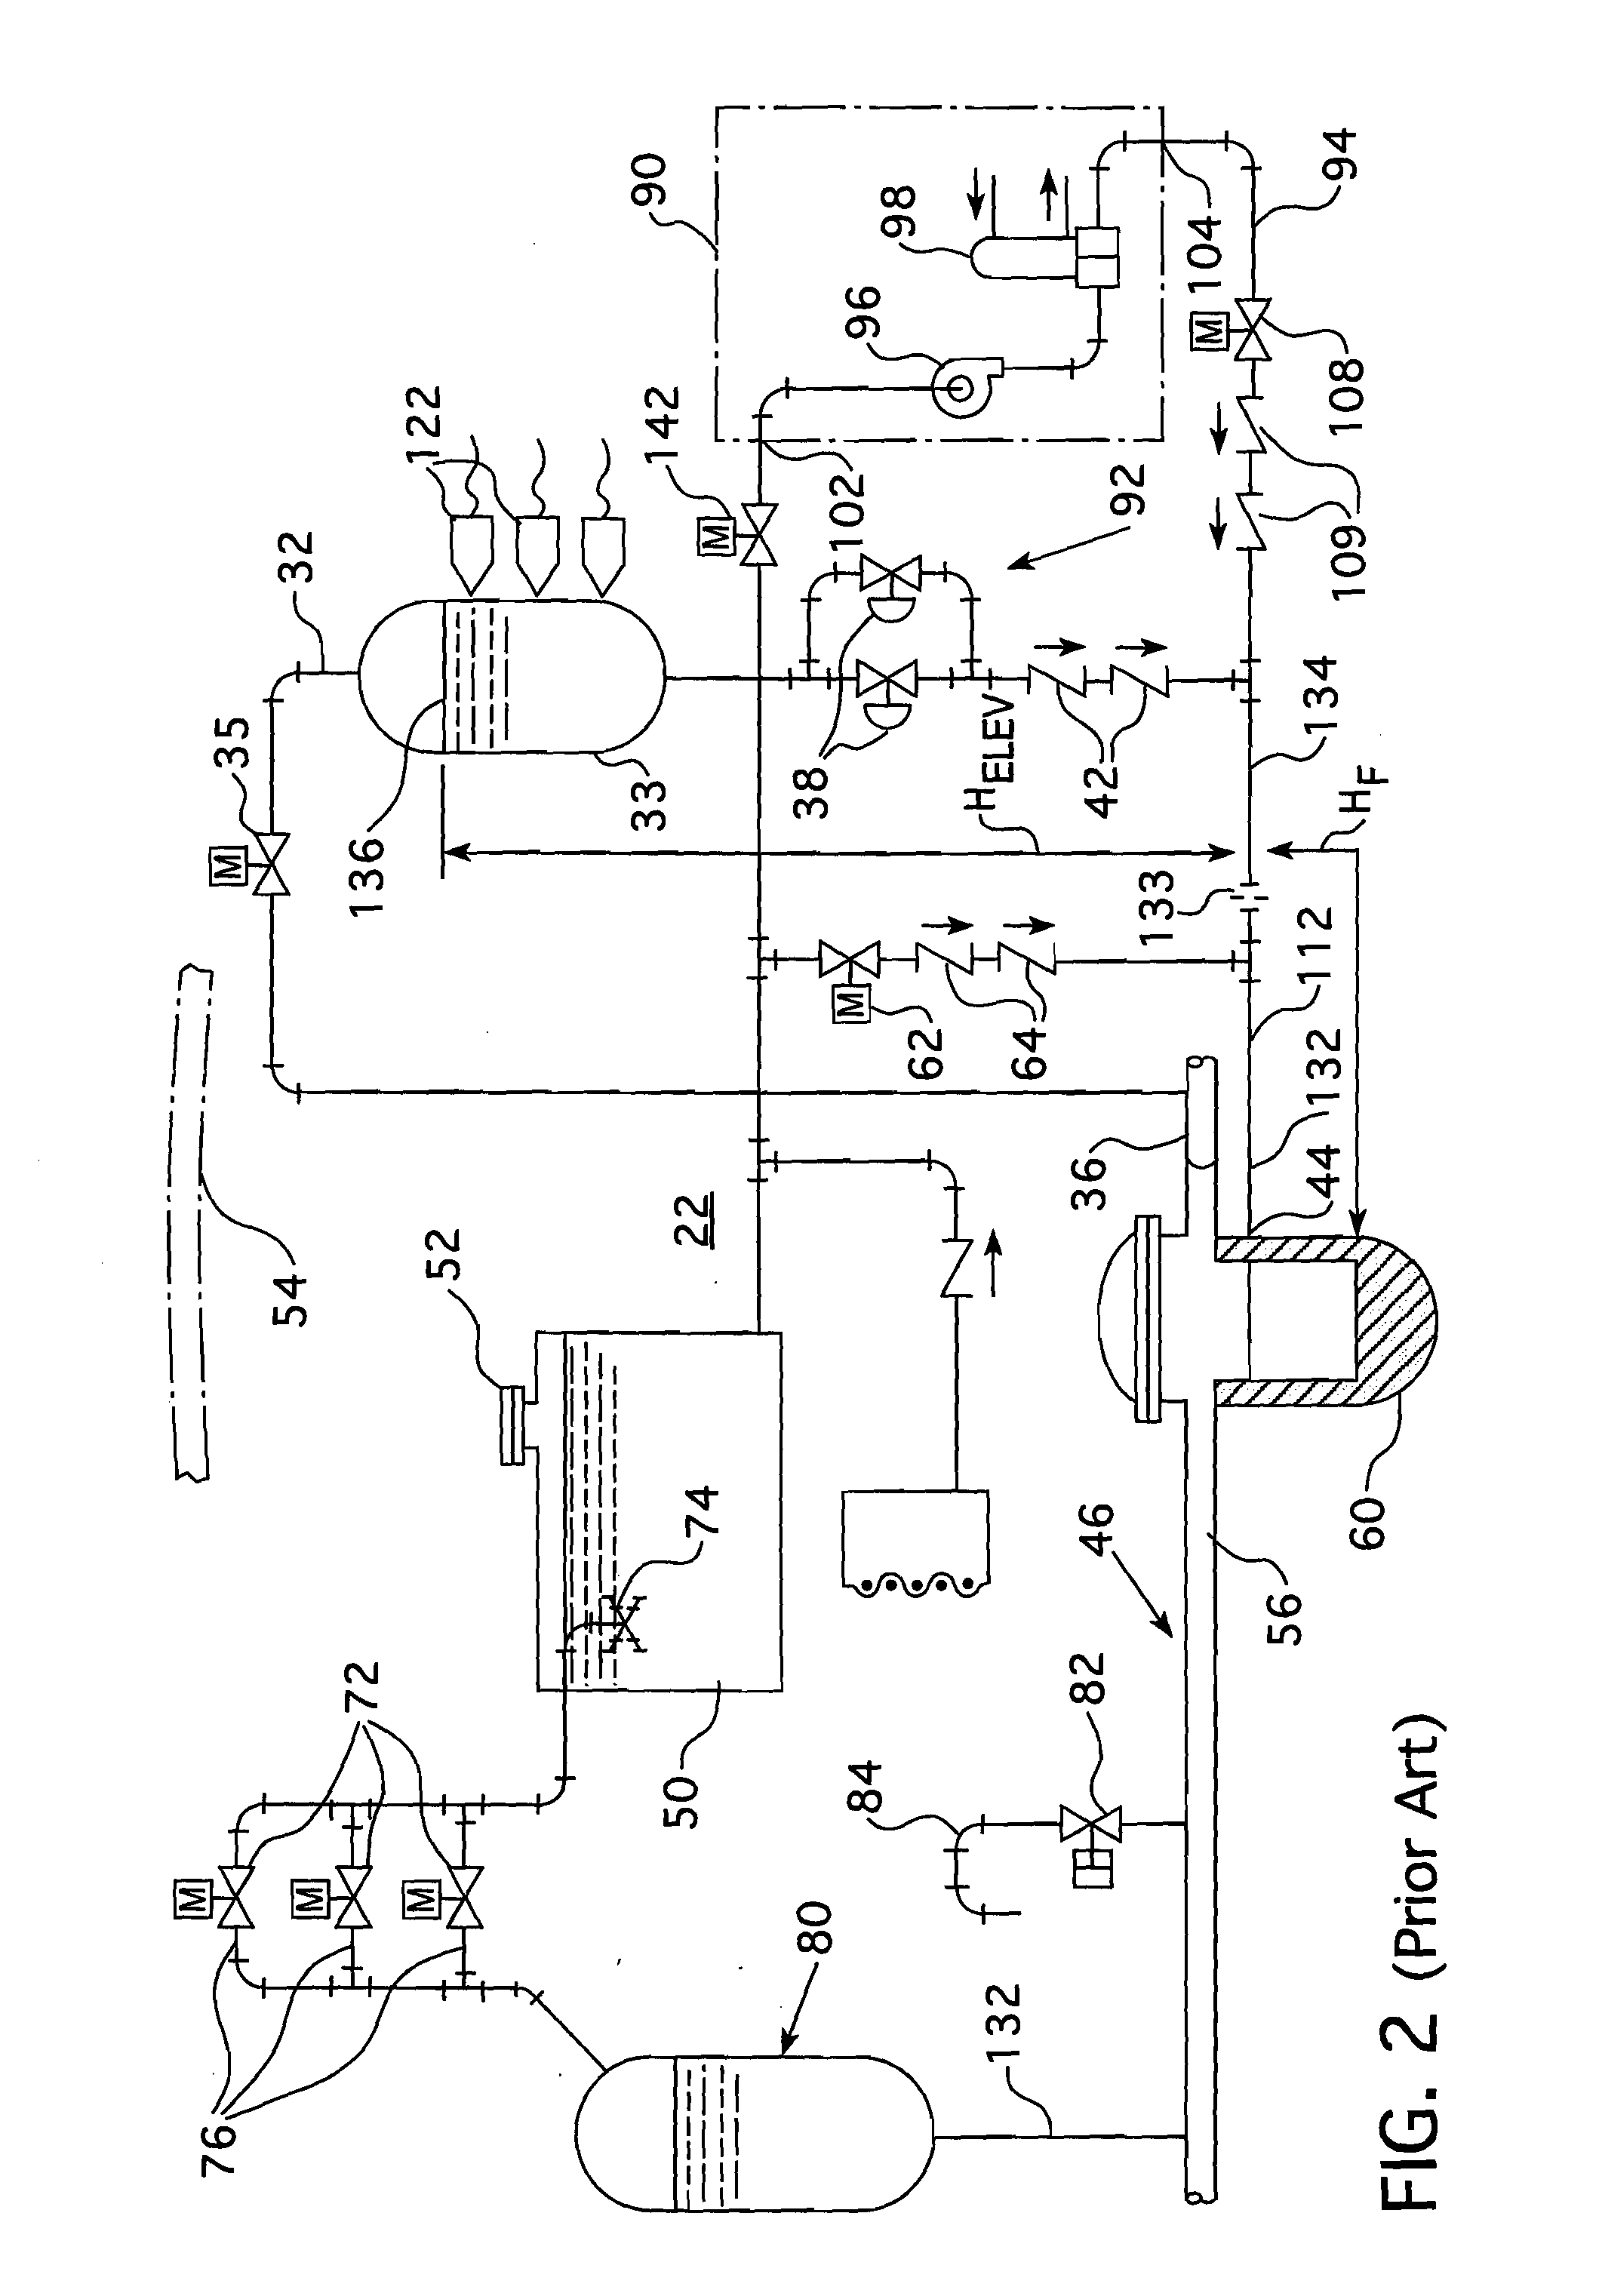 Nuclear reactor automatic depressurization system